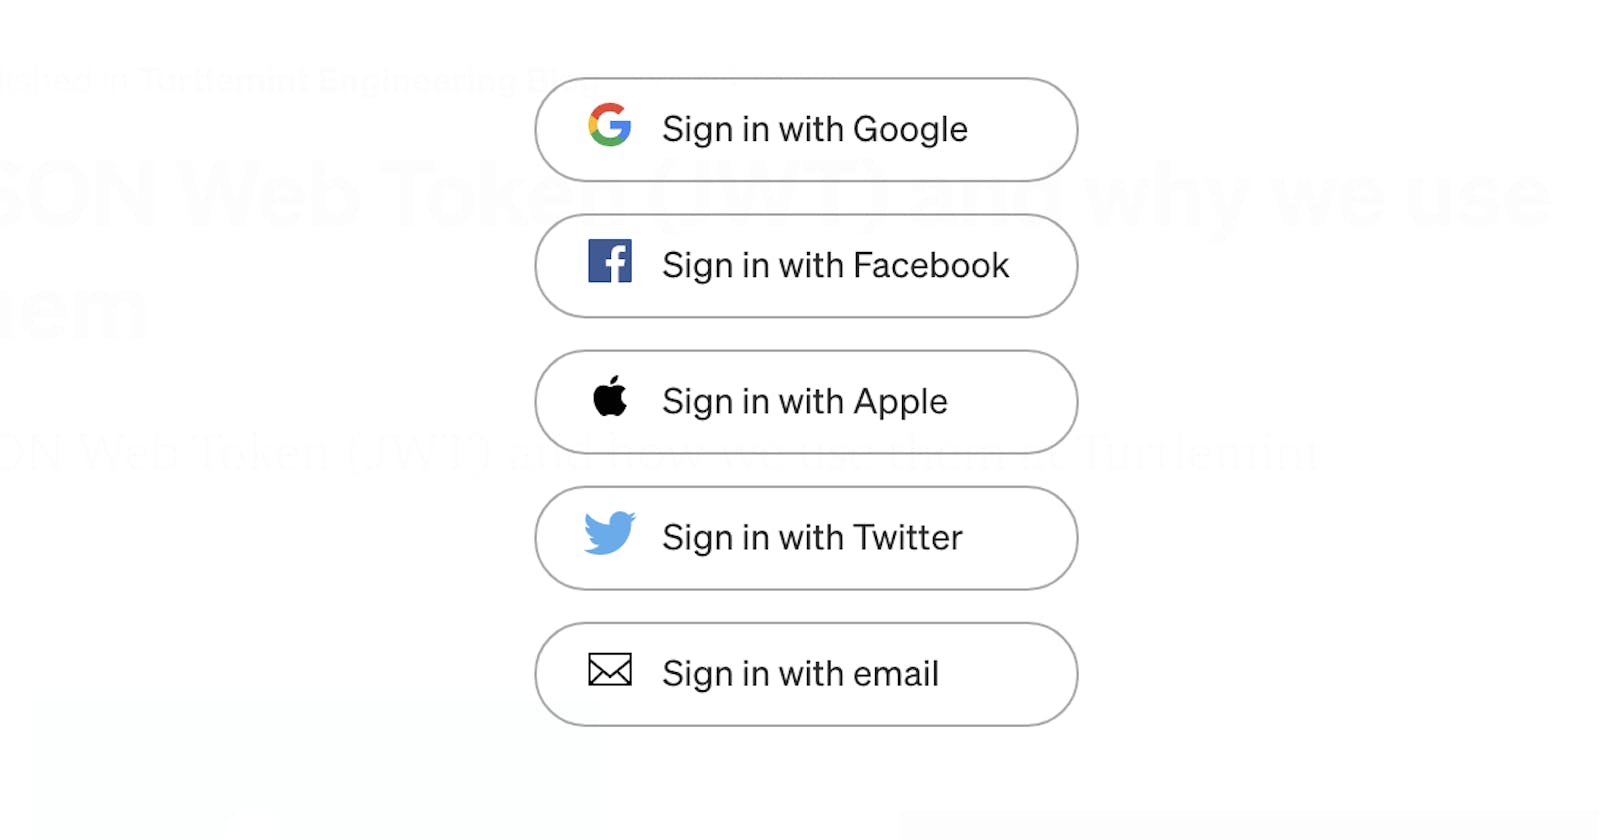 Why Is a Social Login More Secure?